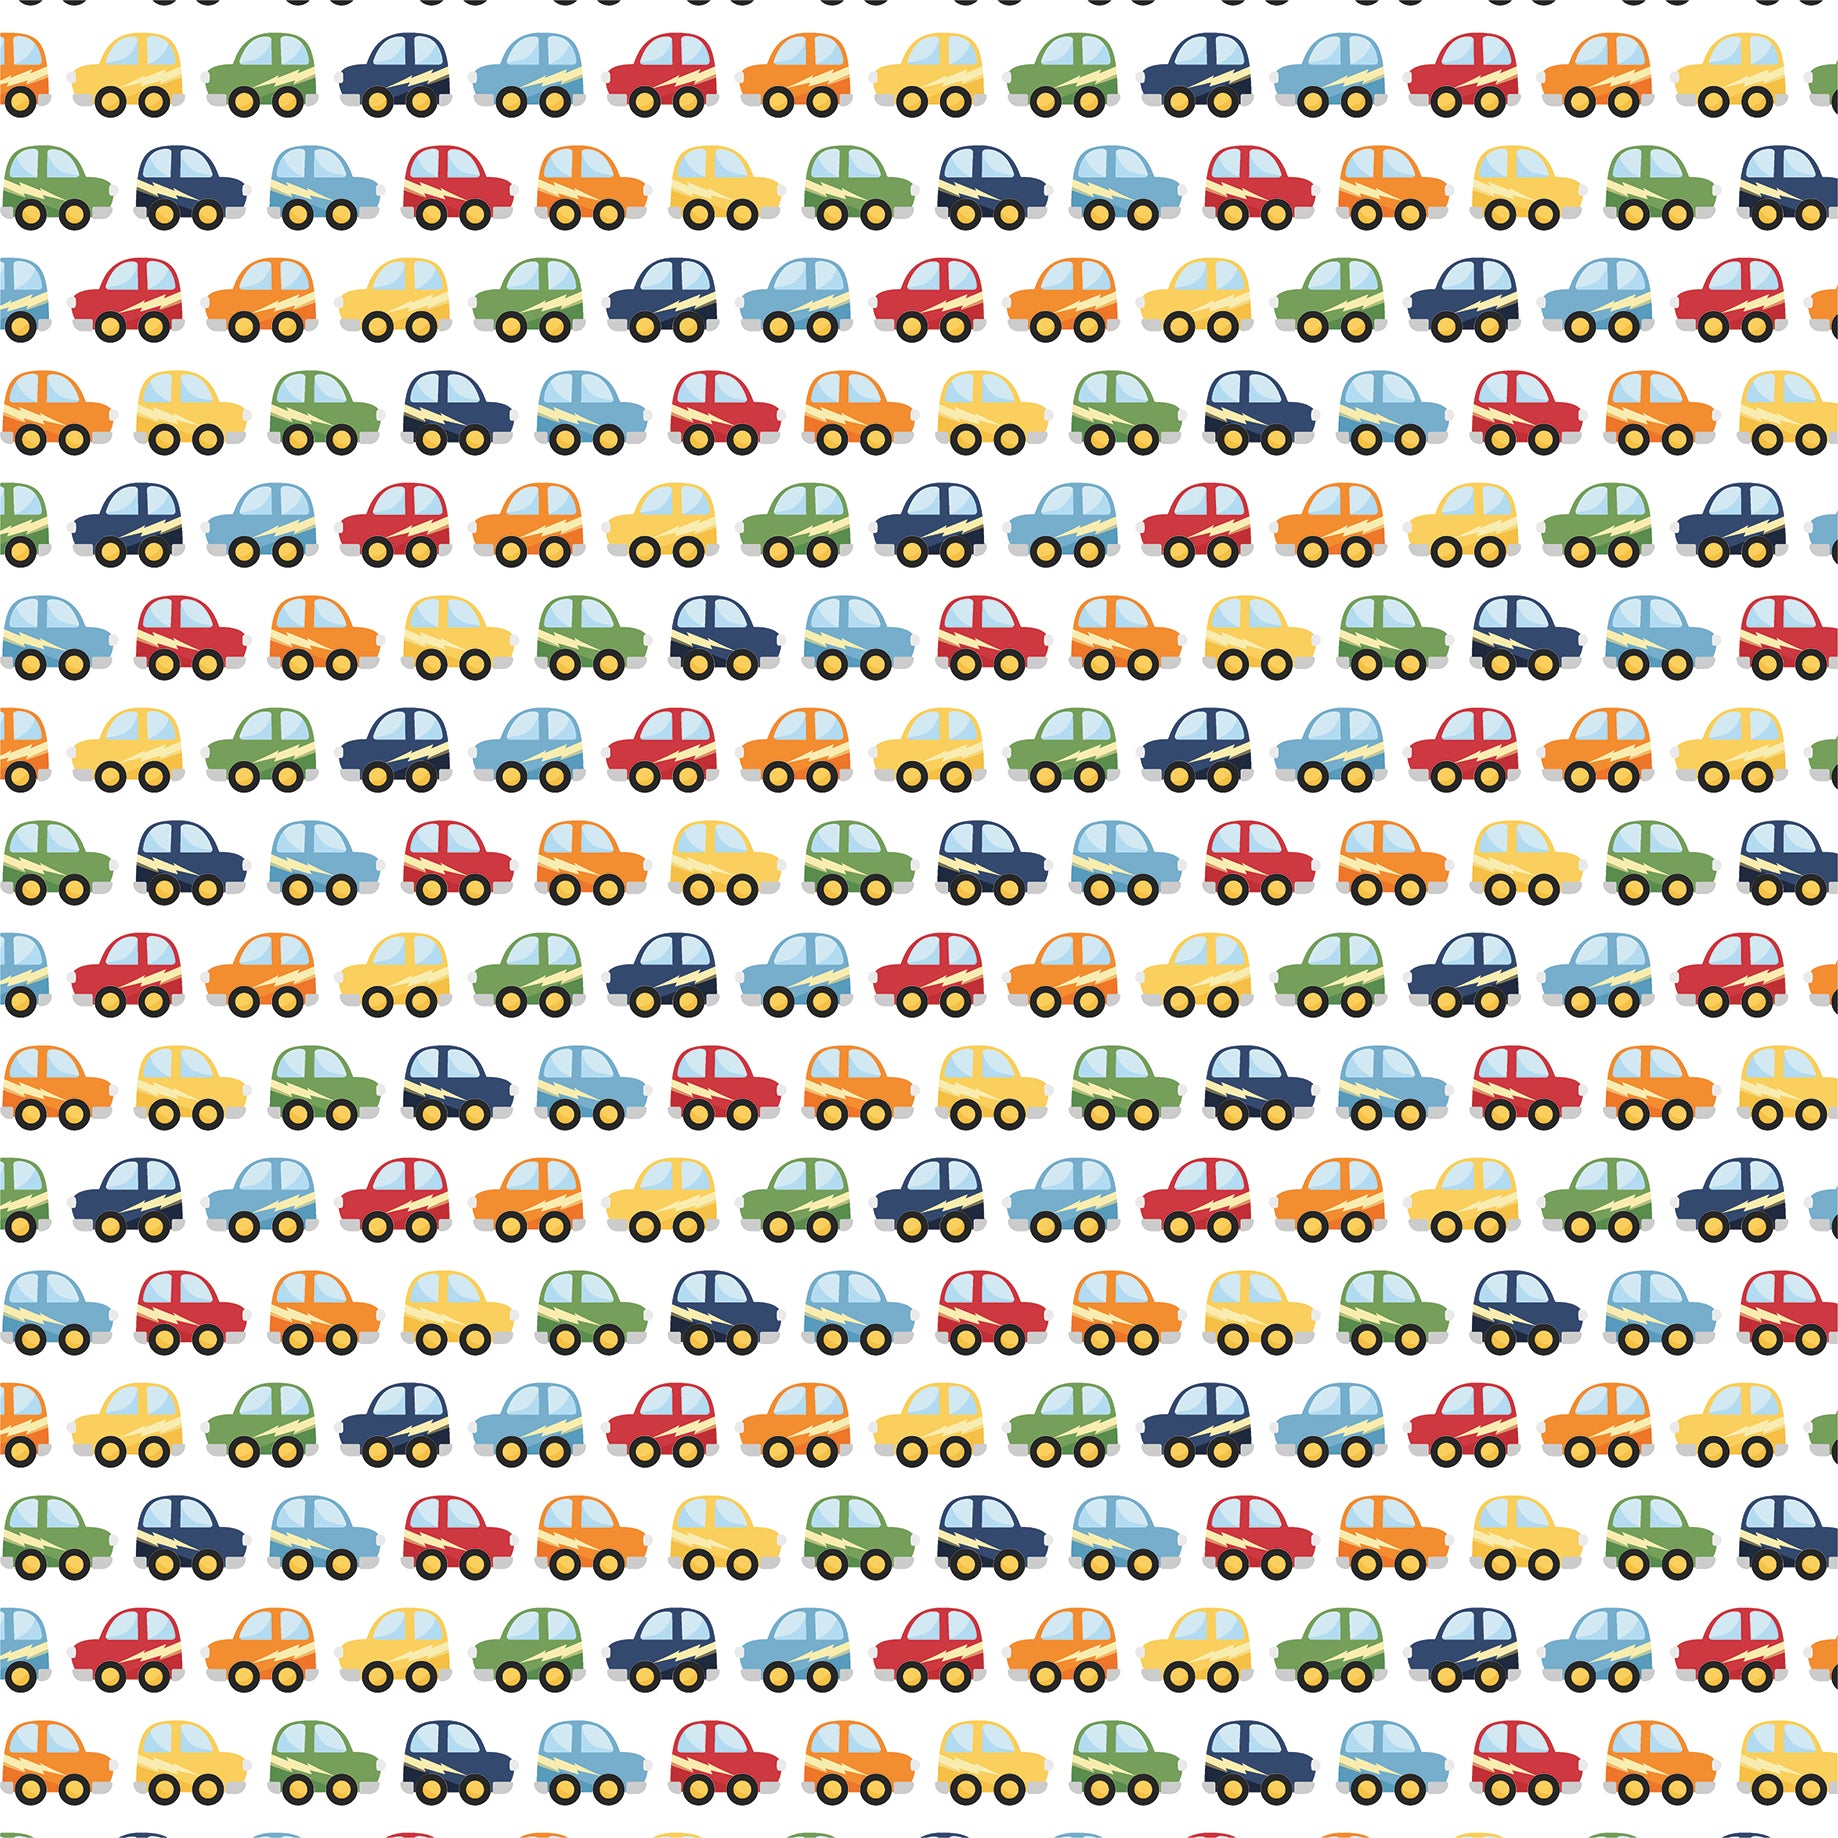 My Little Boy Collection Cars Go Beep 12 x 12 Double-Sided Scrapbook Paper by Echo Park Paper